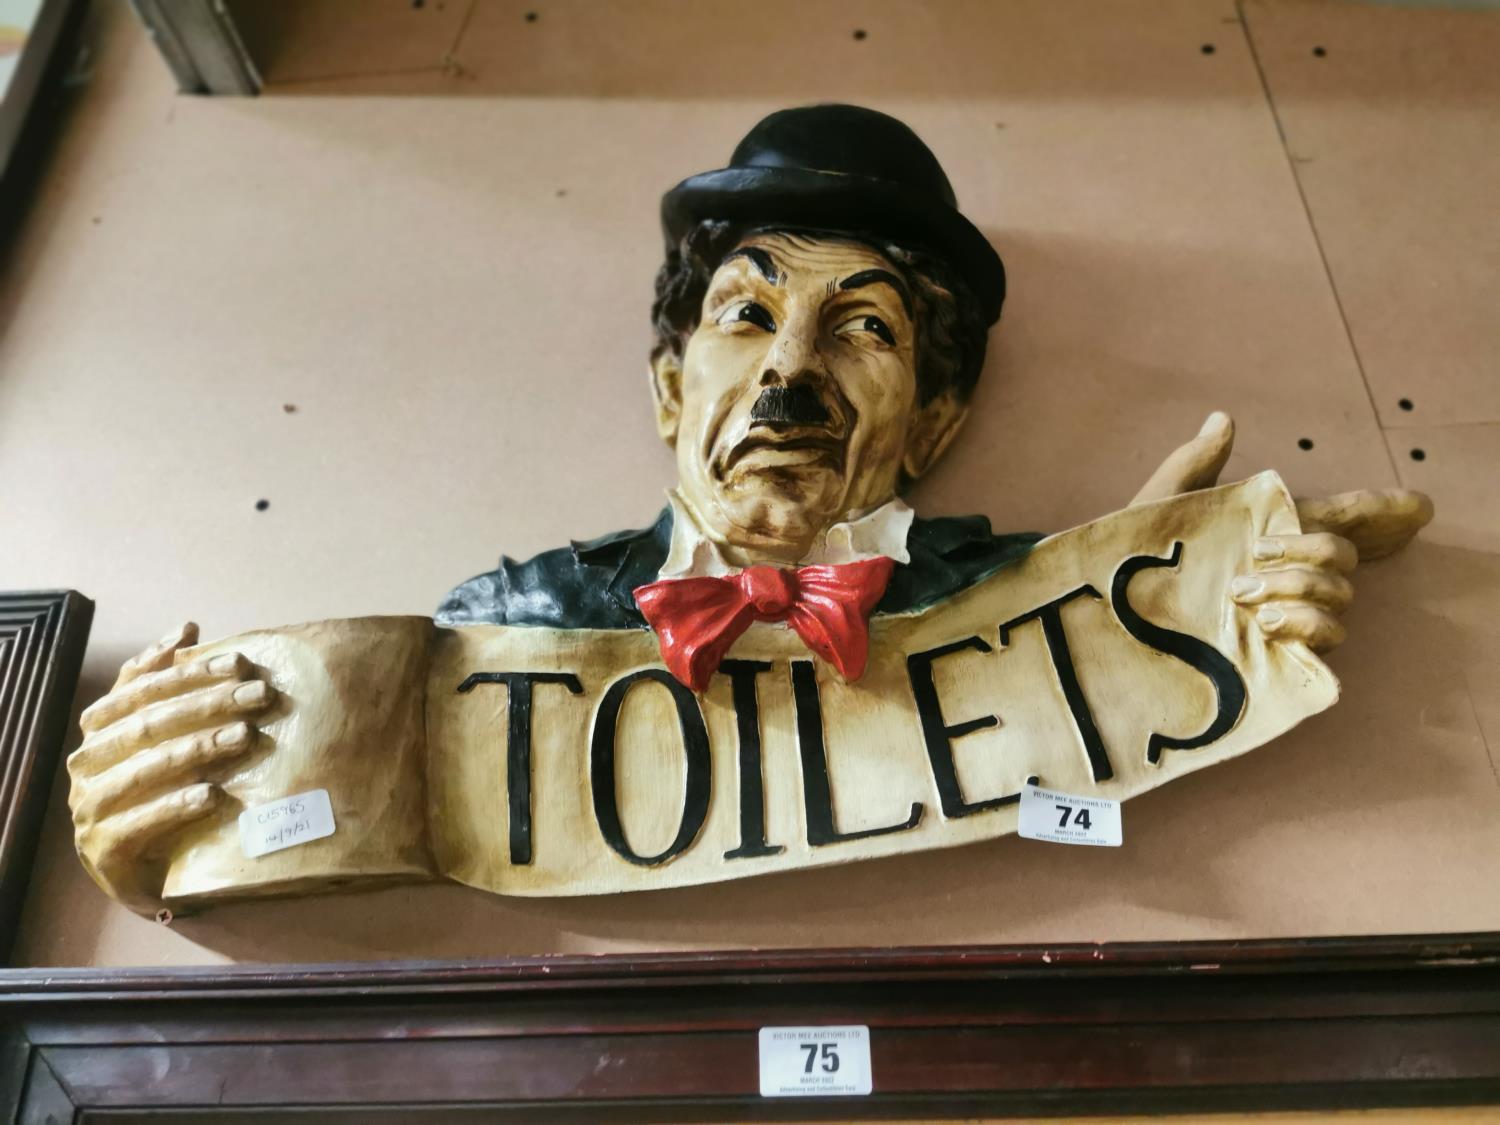 Plaster wall plaque Toilet sign depicting Charlie Chaplin